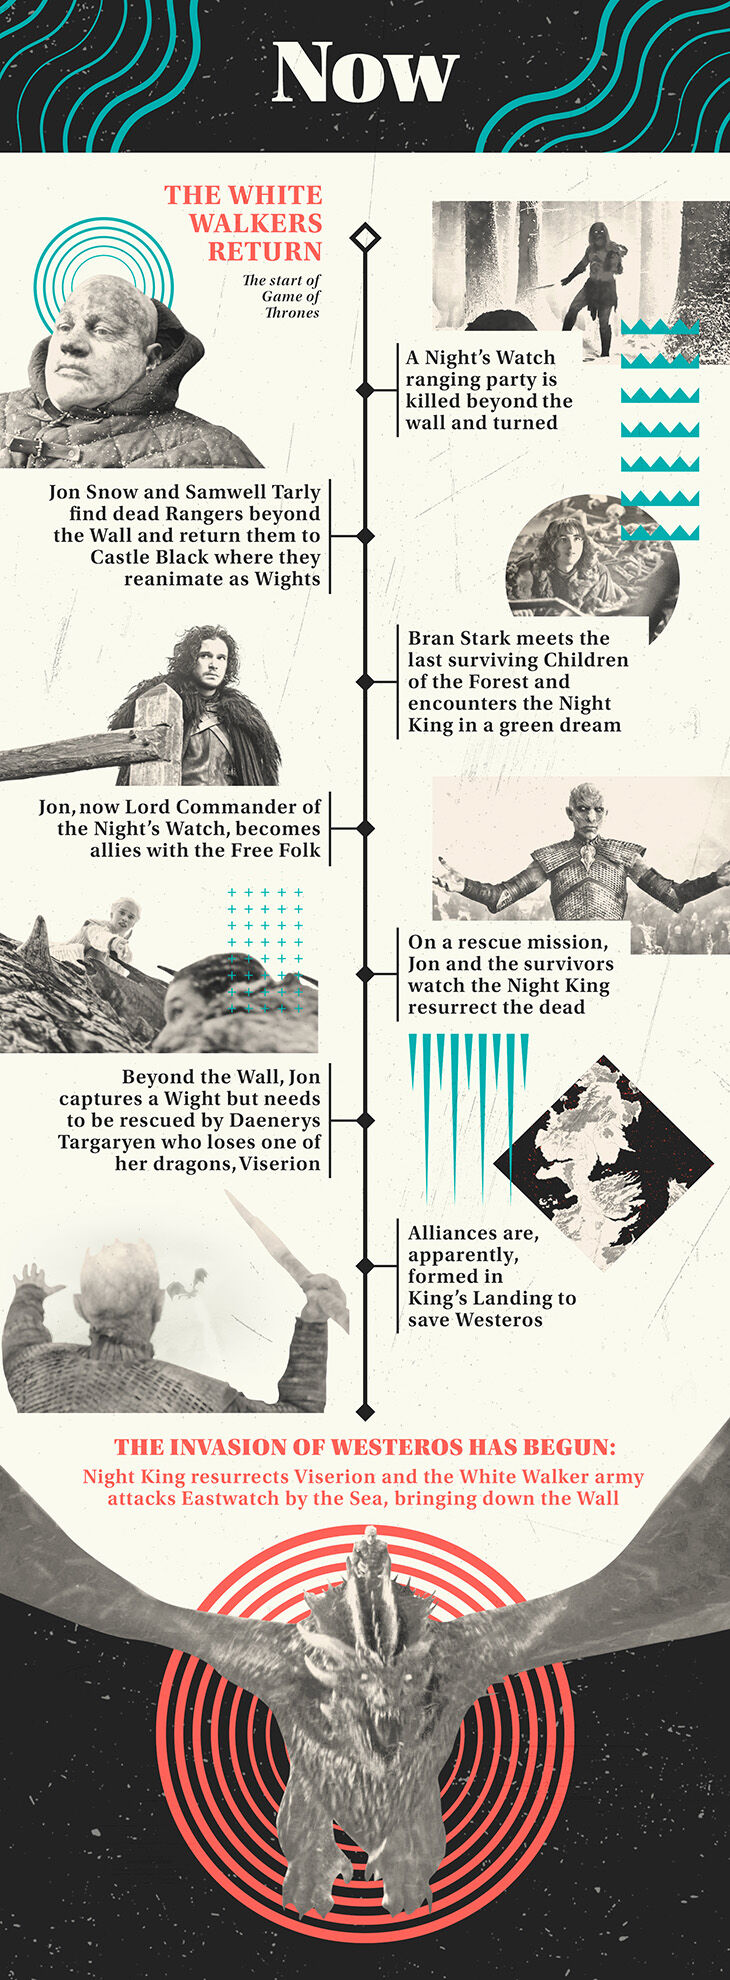 White Walkers Timeline Game of Thrones